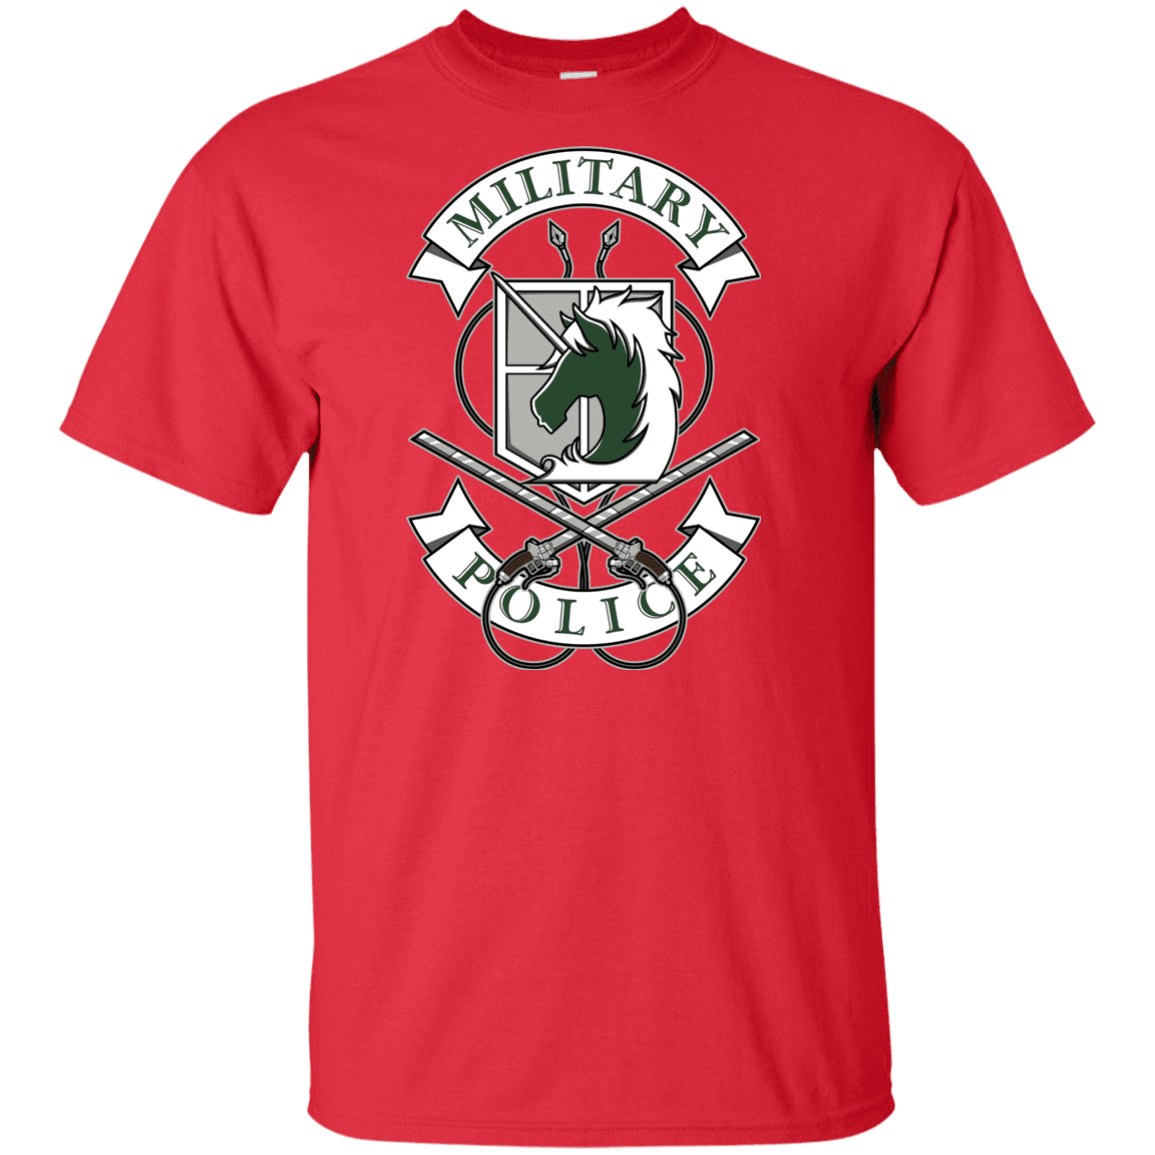 T-Shirts Red / XLT AoT Military Police Tall T-Shirt